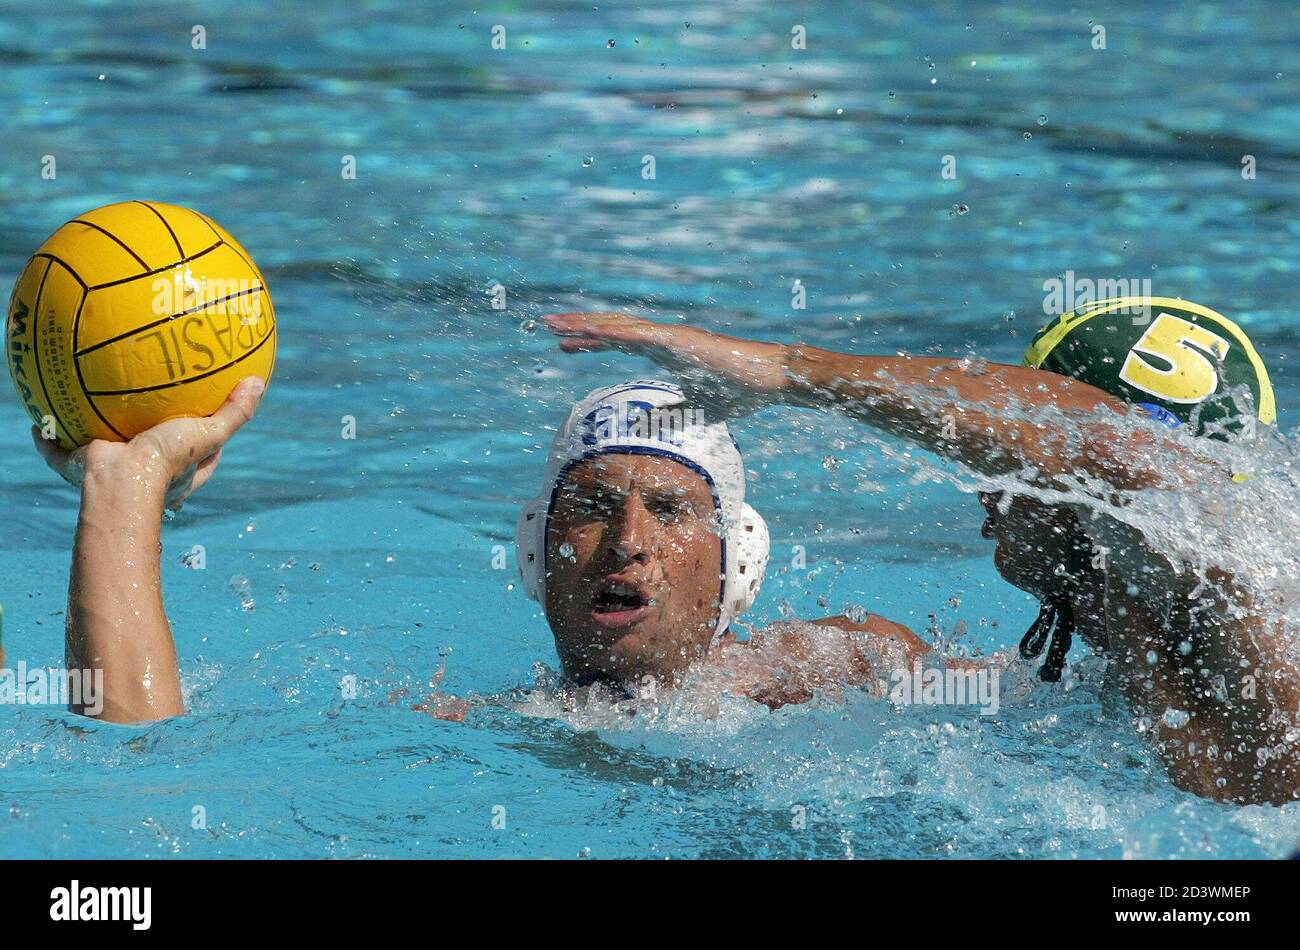 Water Polo World League High Resolution Stock Photography and Images - Alamy